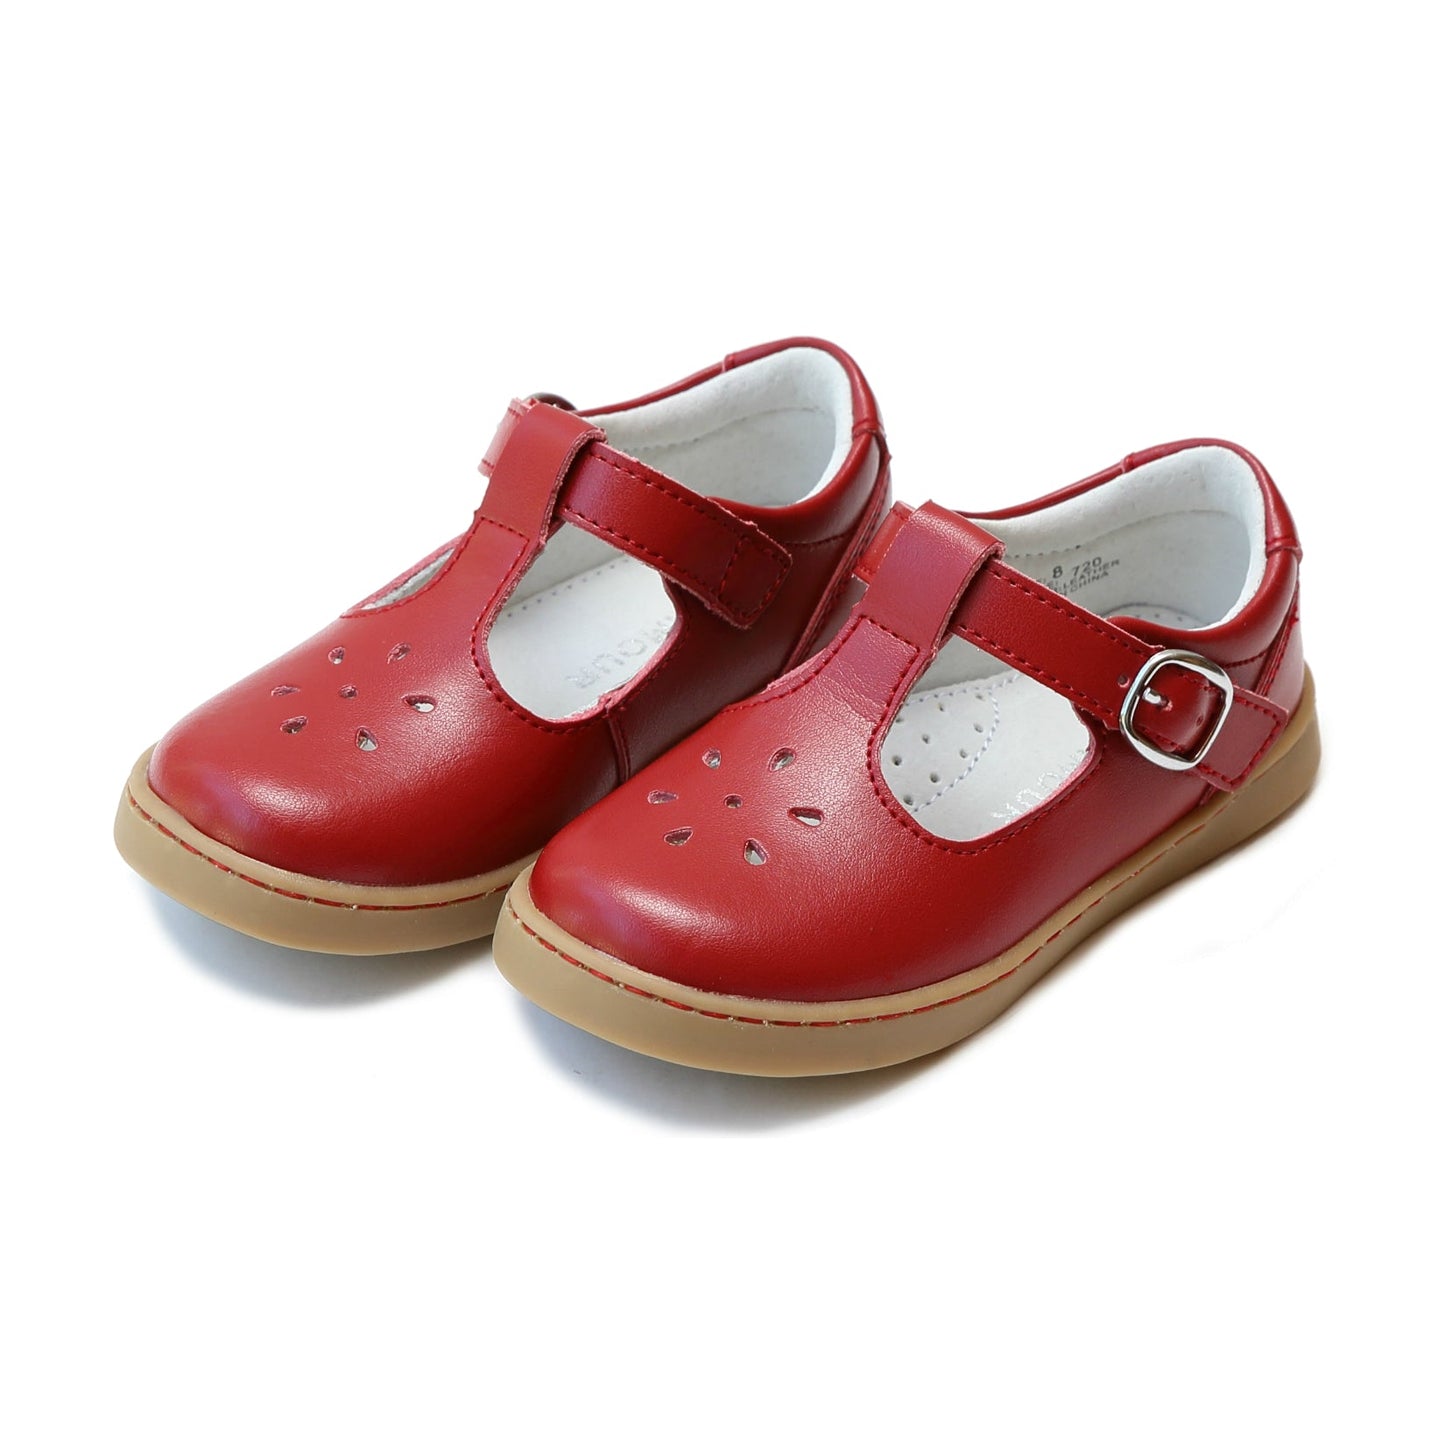 L'Amour Chelsea T-Strap Mary Jane Mary Janes